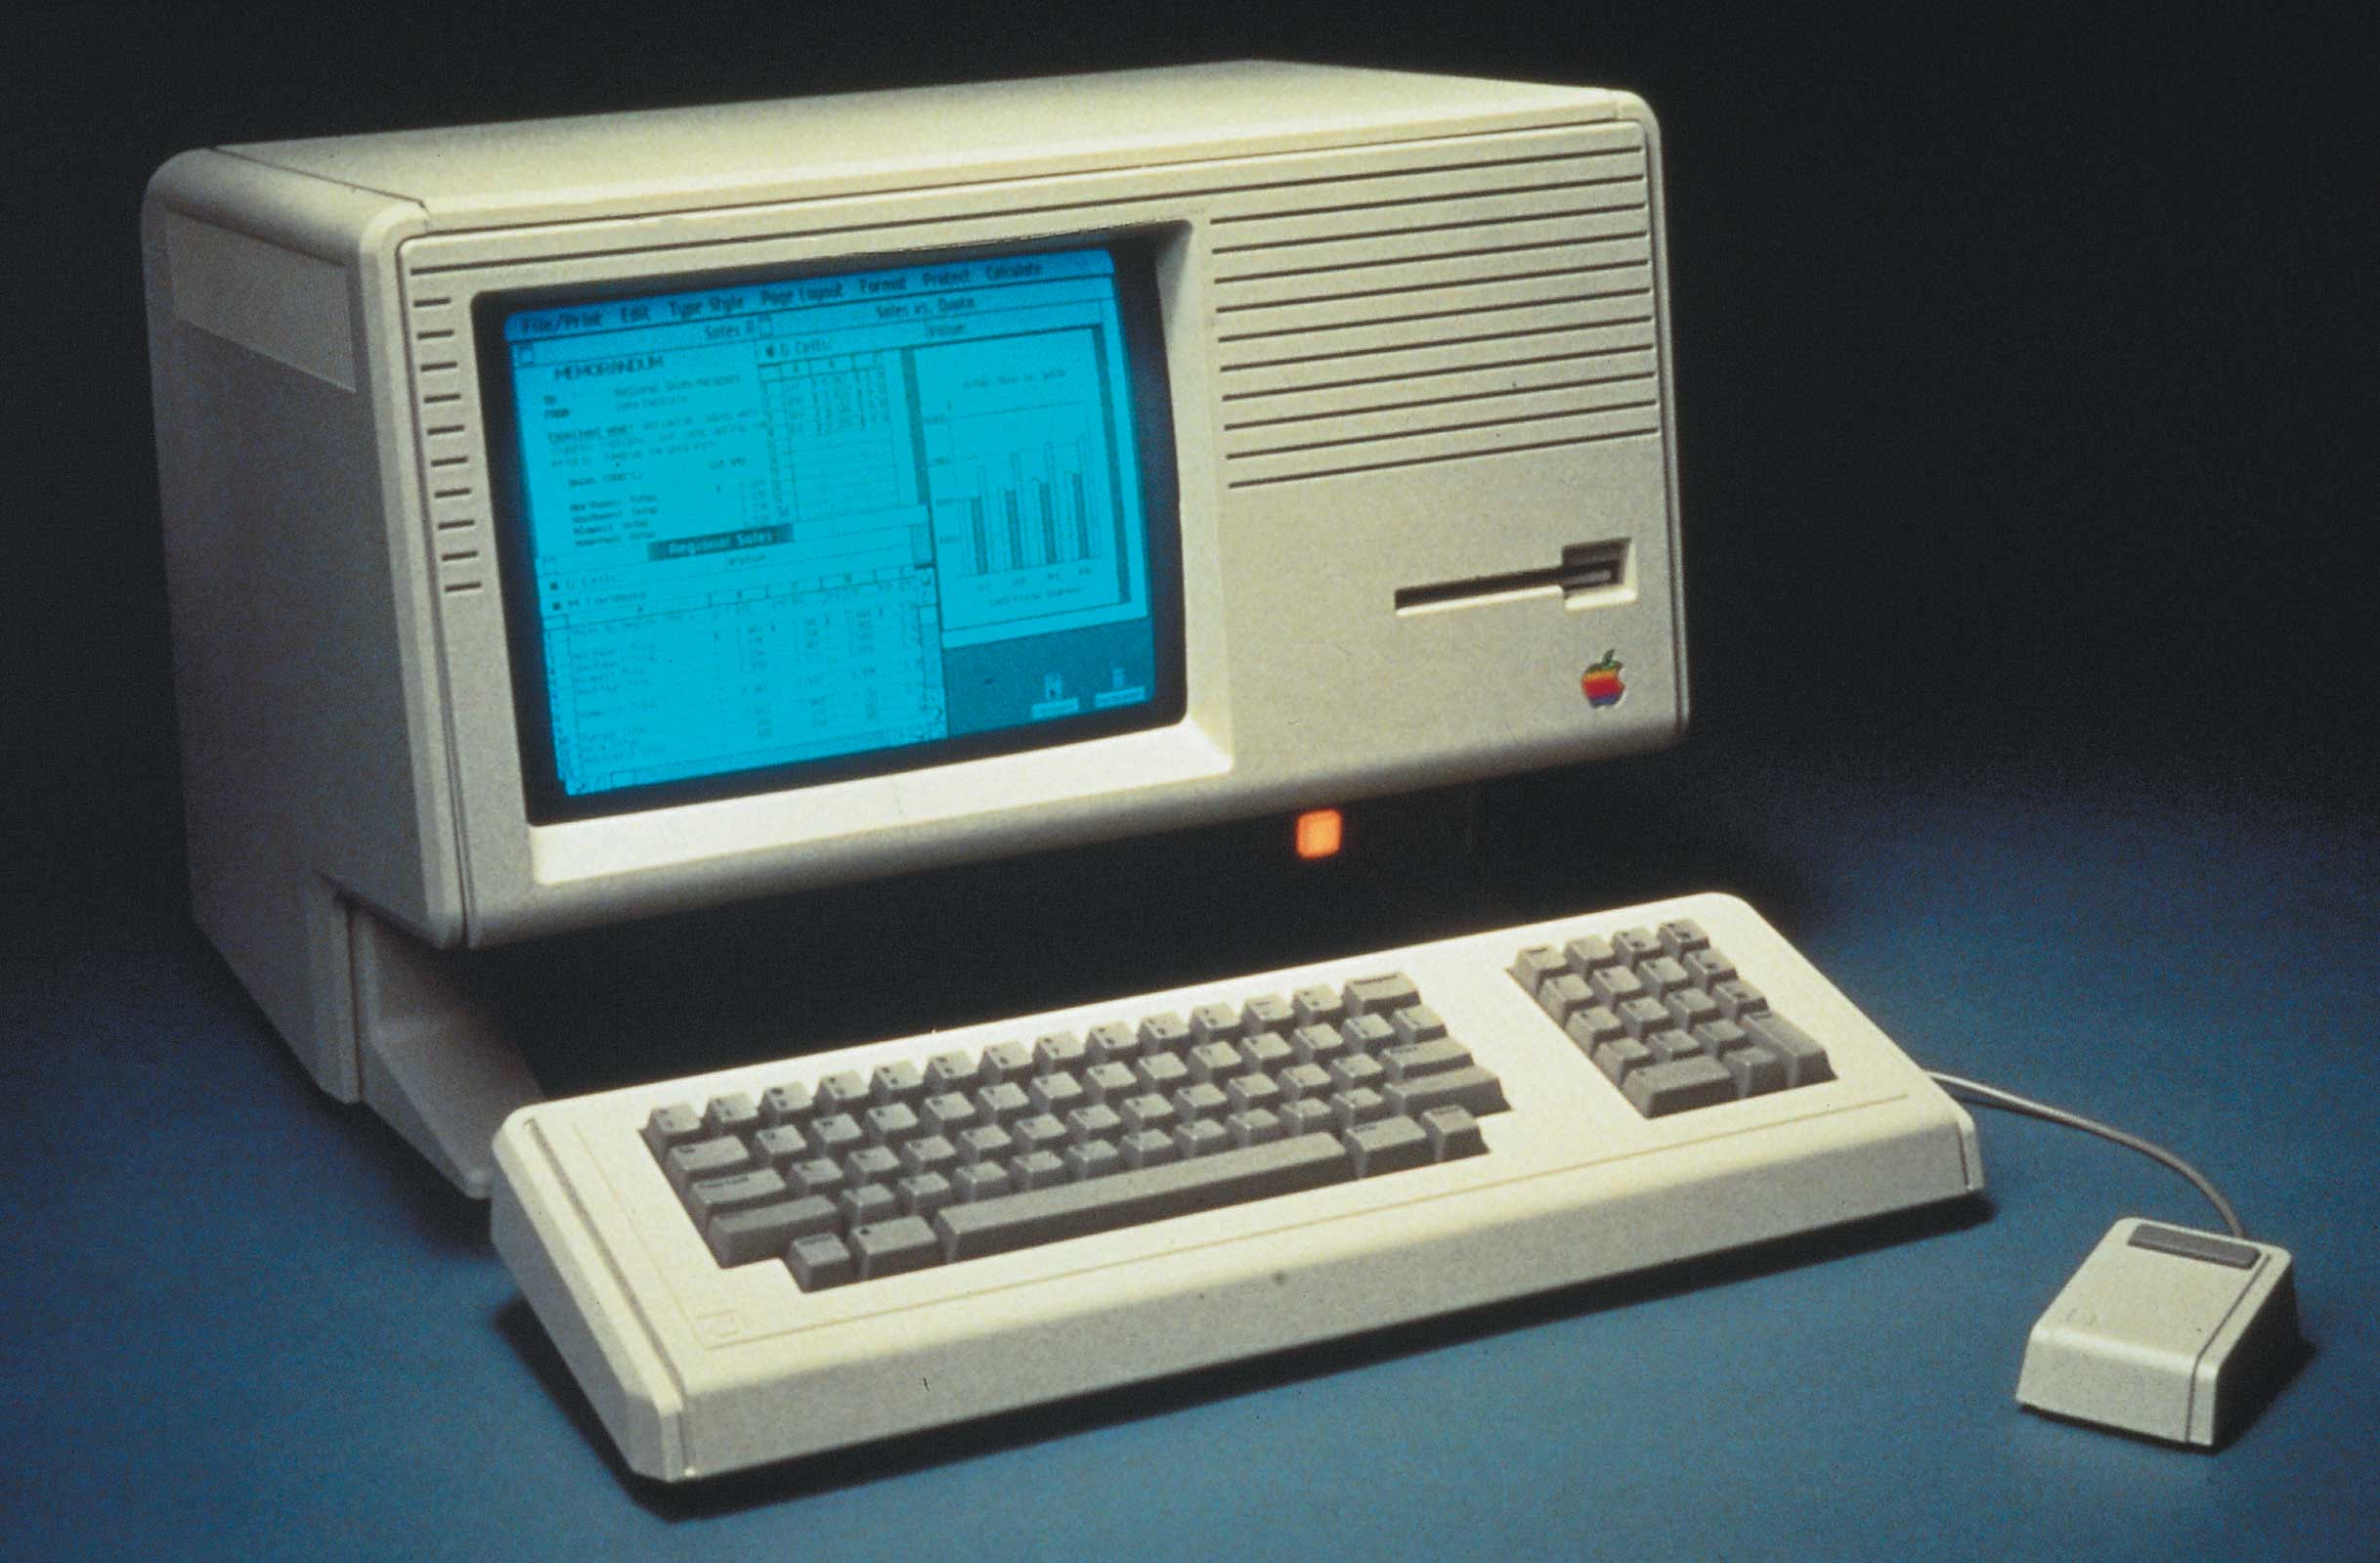 What is Apple Computer? The History of the Apple Computer